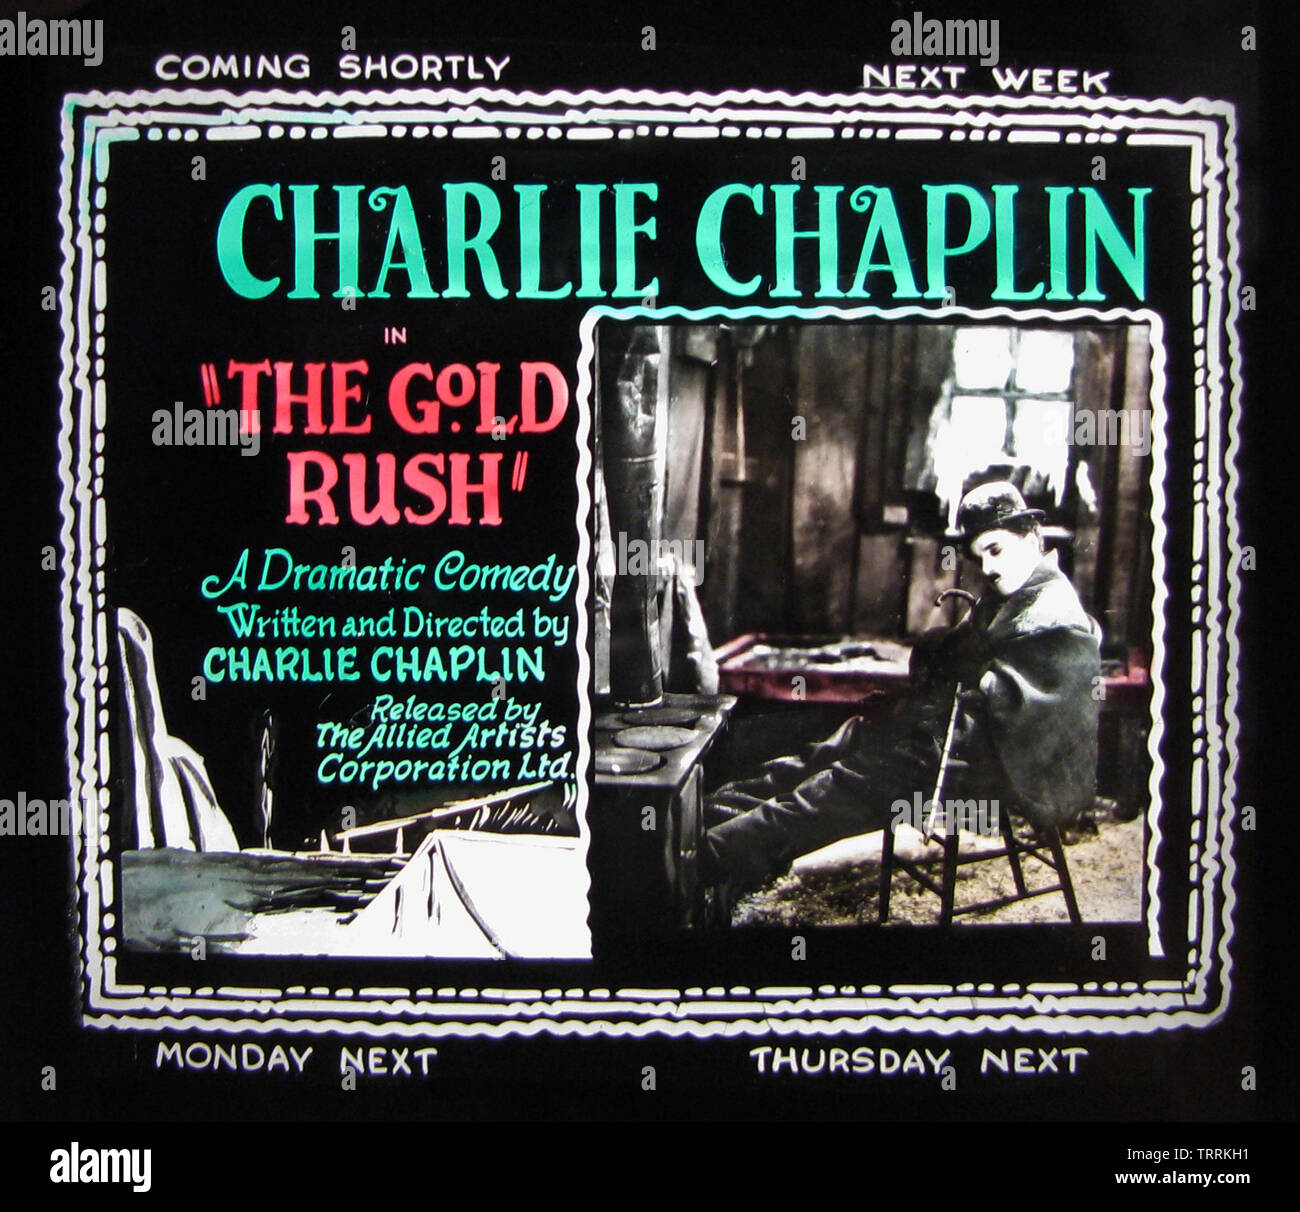 Charlie Chaplin, The Gold Rush, forthcoming attraction cinema advertisment Stock Photo